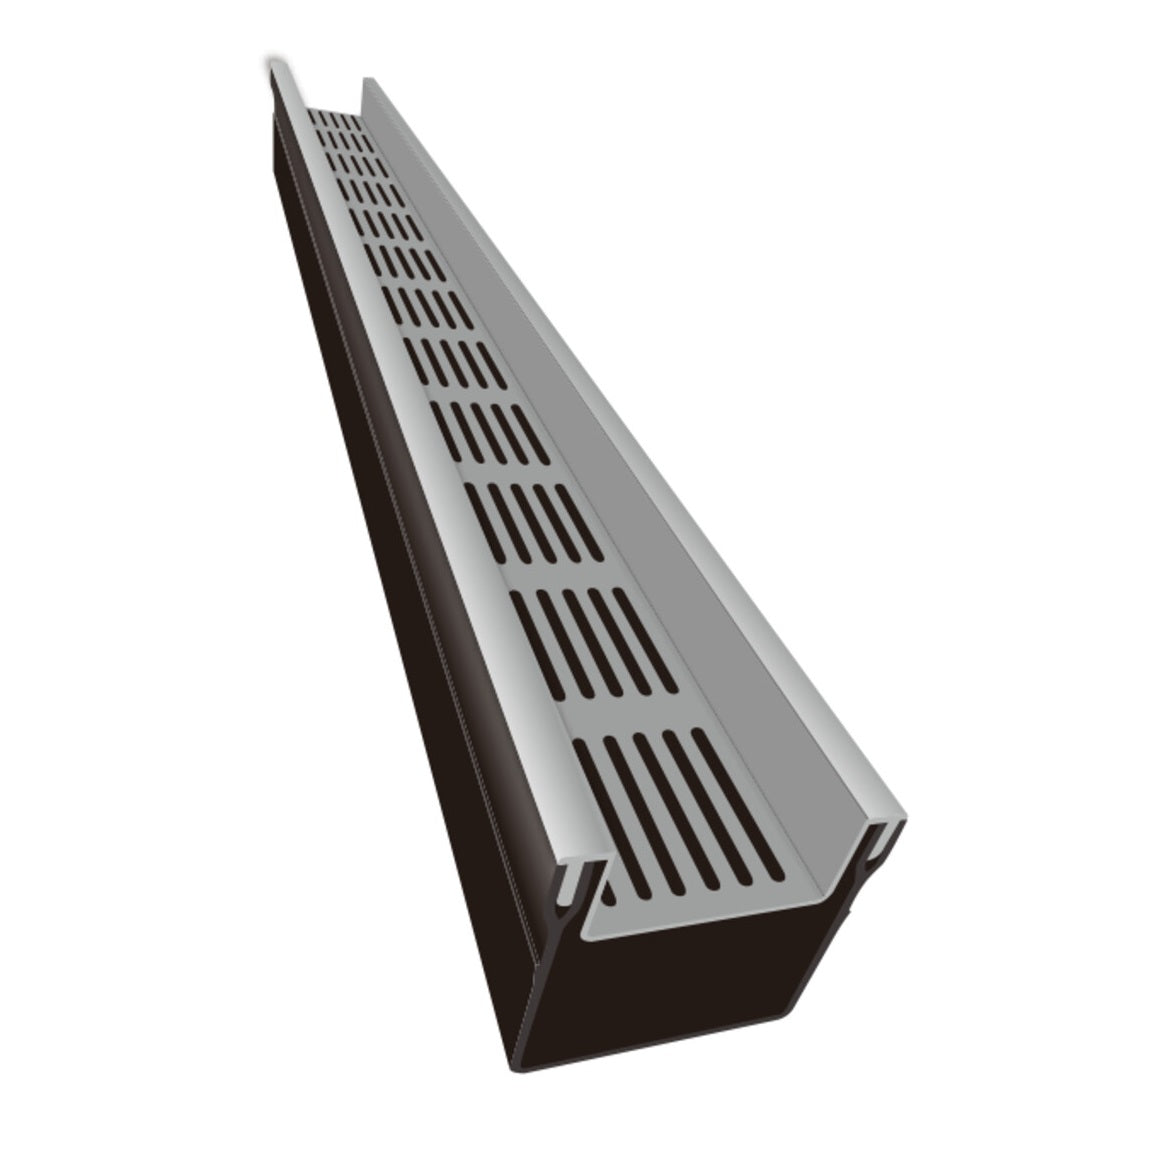 1m Threshold Stone+ French Drain with Silver Aluminium Recessed Grating (105 x 100mm Deep)